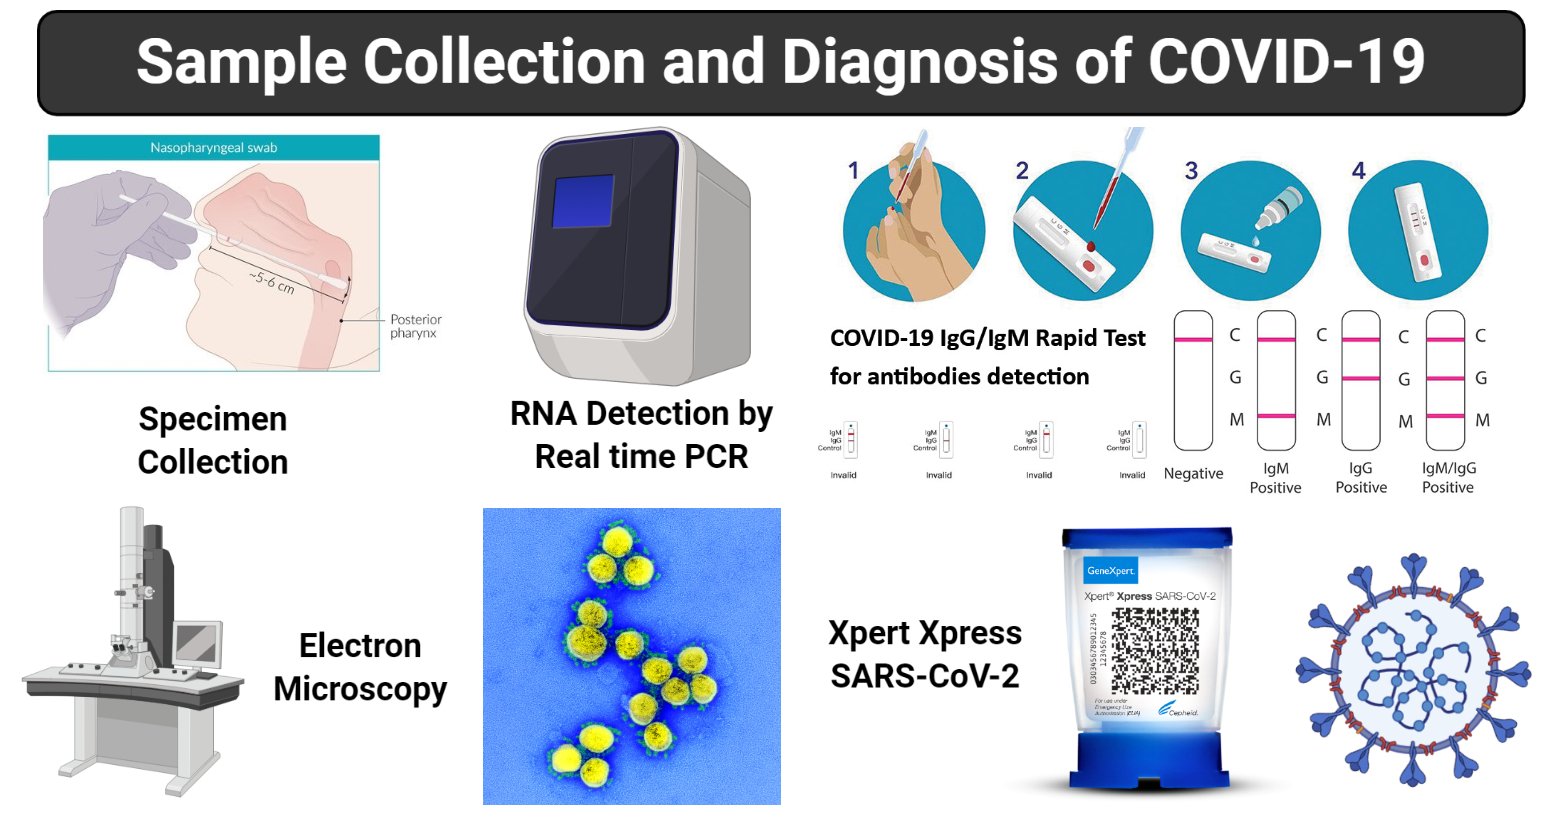 Sample collection and Diagnosis of COVID-19